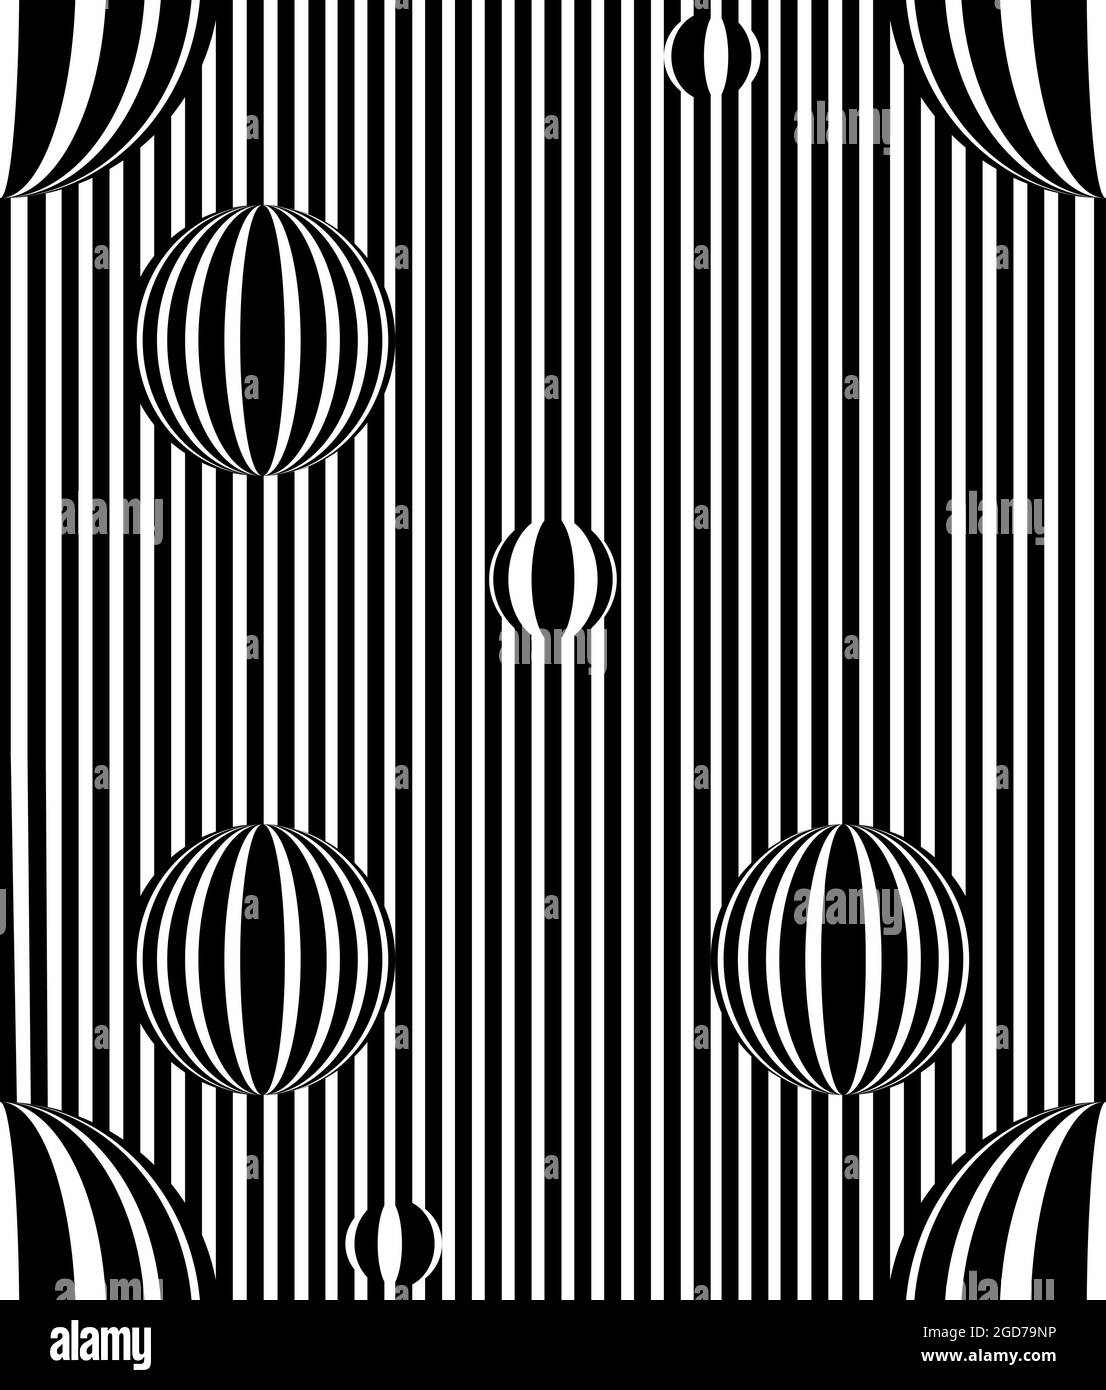 vector - optical art, optical illusion pattern, black and white background. Stock Vector